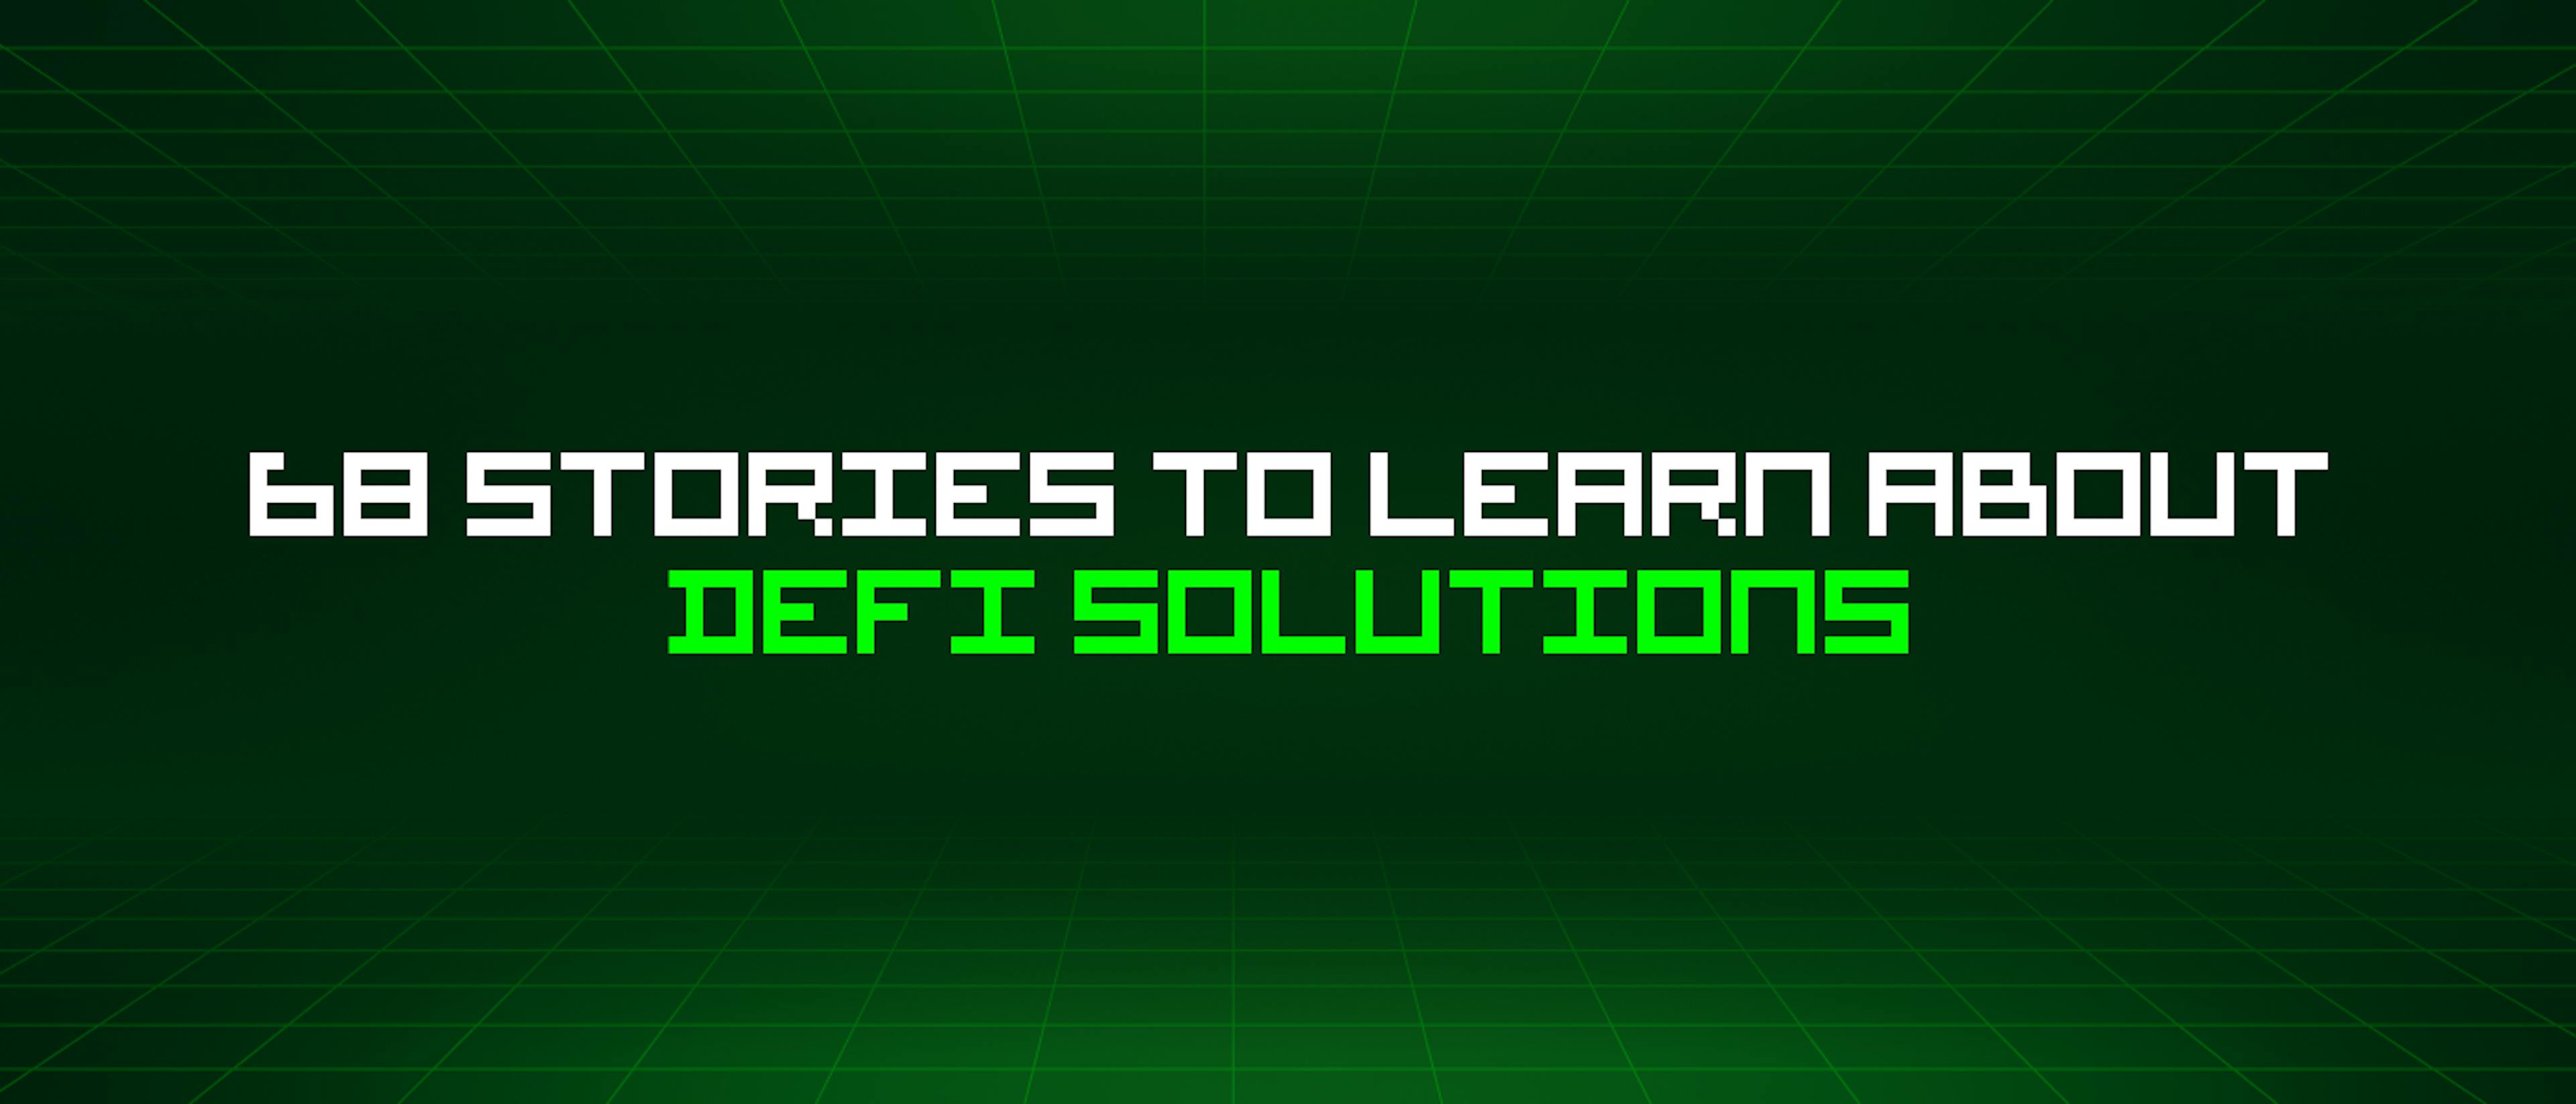 featured image - 68 Stories To Learn About Defi Solutions